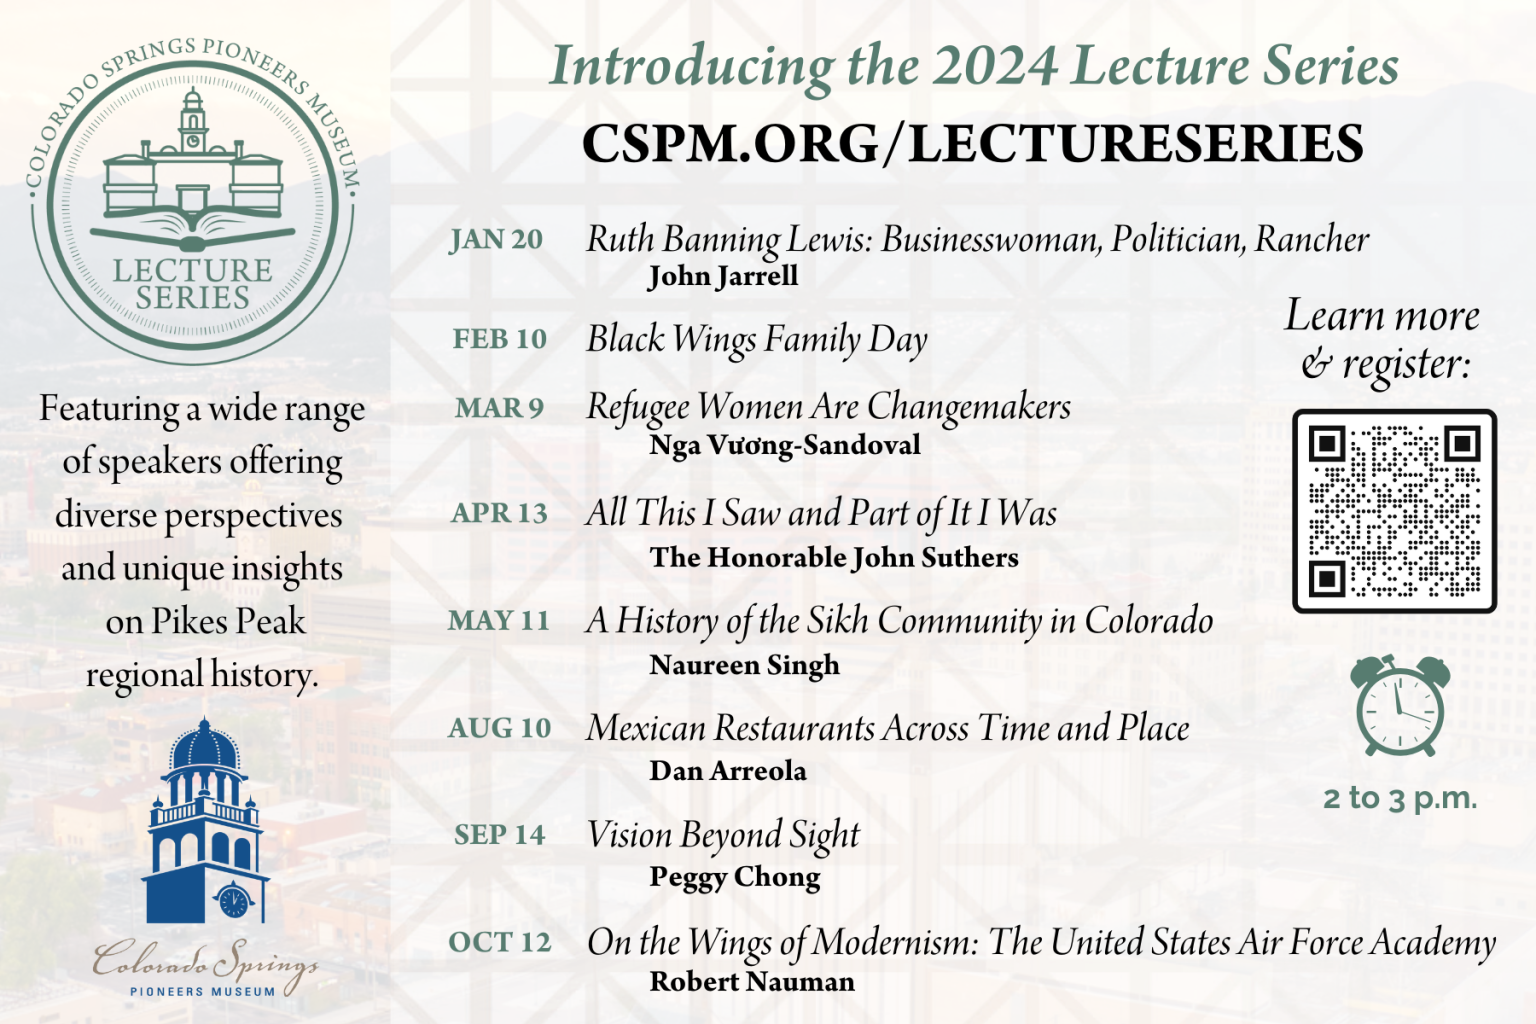 Introducing the 2024 Lecture Series. Featuring a wide range of speakers offering diverse perspective and unique insights on Pikes Peak Regional History. January 20. Ruth Banning Lewis: Businesswoman, Politician, Rancher. Presented by John Jarrell. February 10. Black Wings Family Day. March 9. Refugee Women Are Changemakers. Presented by Nga Vu'o'ng-Sandoval. April 13. "All This I Saw and Part of it I Was." Presented by the Honorable John Suthers. May 11. A History of the Sikh Community in Colorado. Presented by Naureen Singh. August 10. Mexican Restaurants Across Time and Place. Presented by Dan Arreola. September 14. Vision Beyond Sight. Presented by Peggy Chong. October 12. On the Wings of Modernism: The United States Air Force Academy. Presented by Robert Nauman. All events are from 2:00 to 3:00 p.m. Learn more and register at cspm.org/LectureSeries